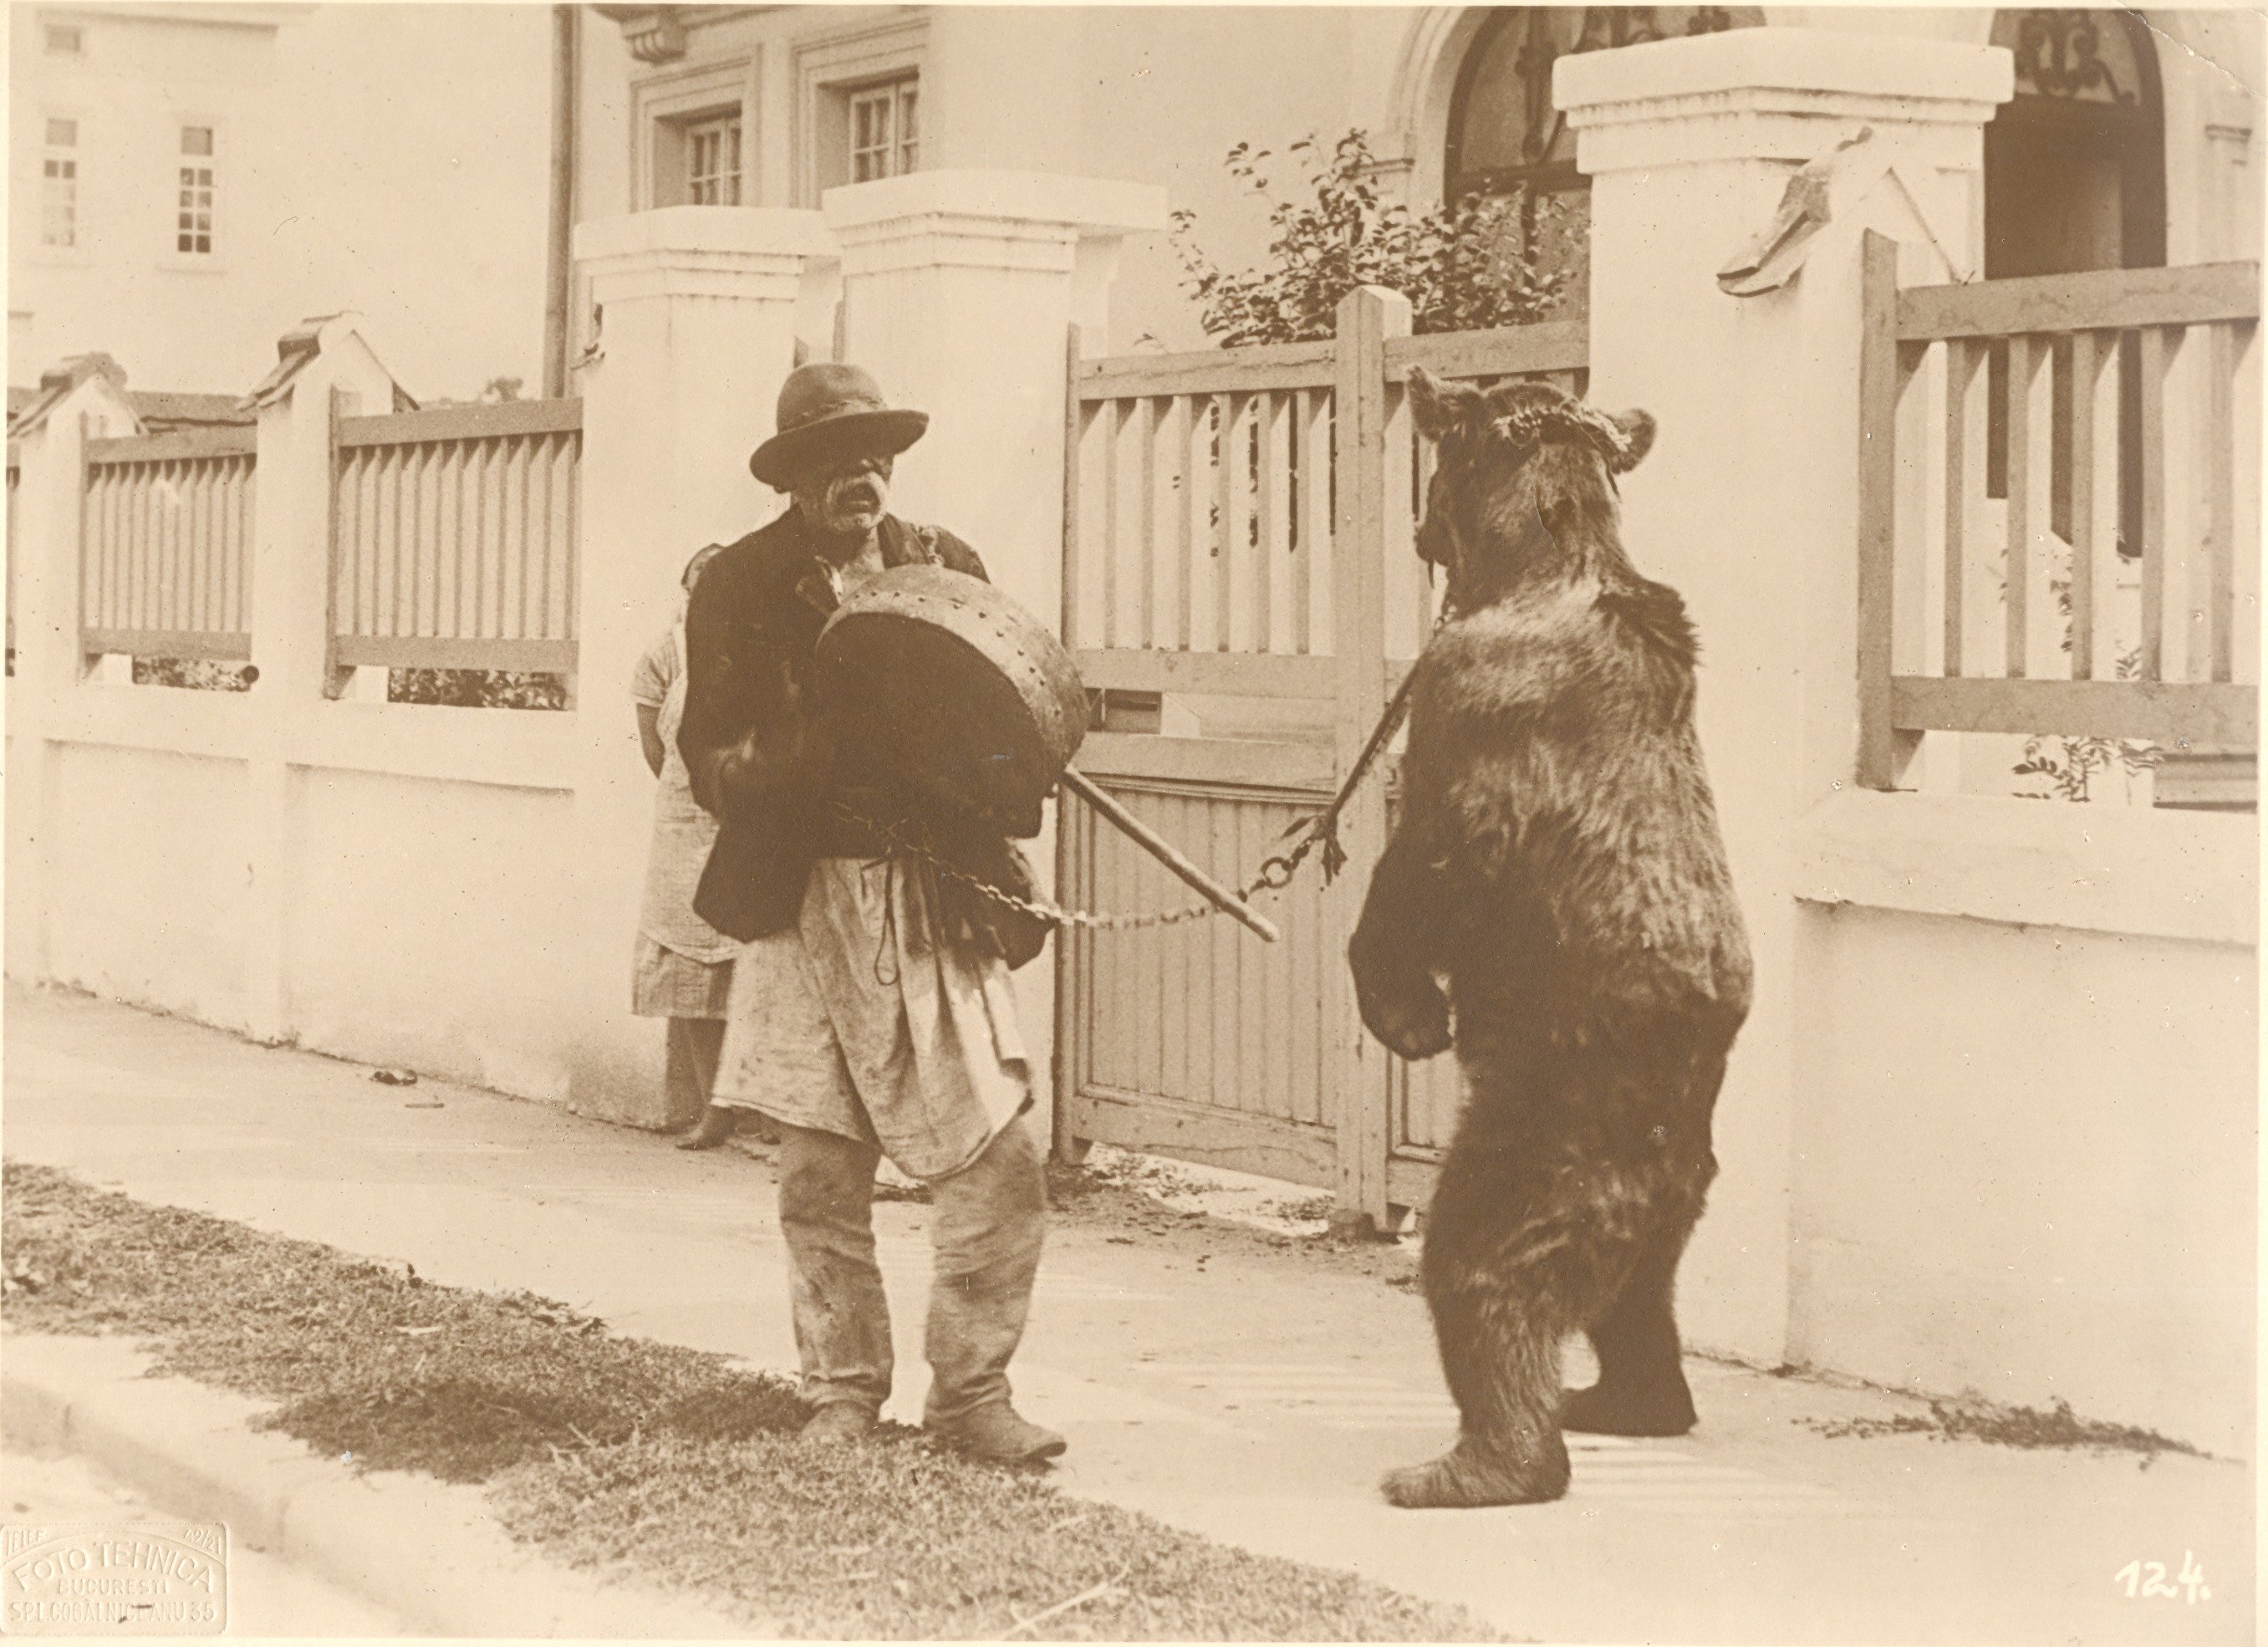  The National Archives, Romania, Bear dance performance paired with the bear trainer Roma man (”ursar”) (end of XIXth century), ref. RO-BU-F-01073-2-1138
